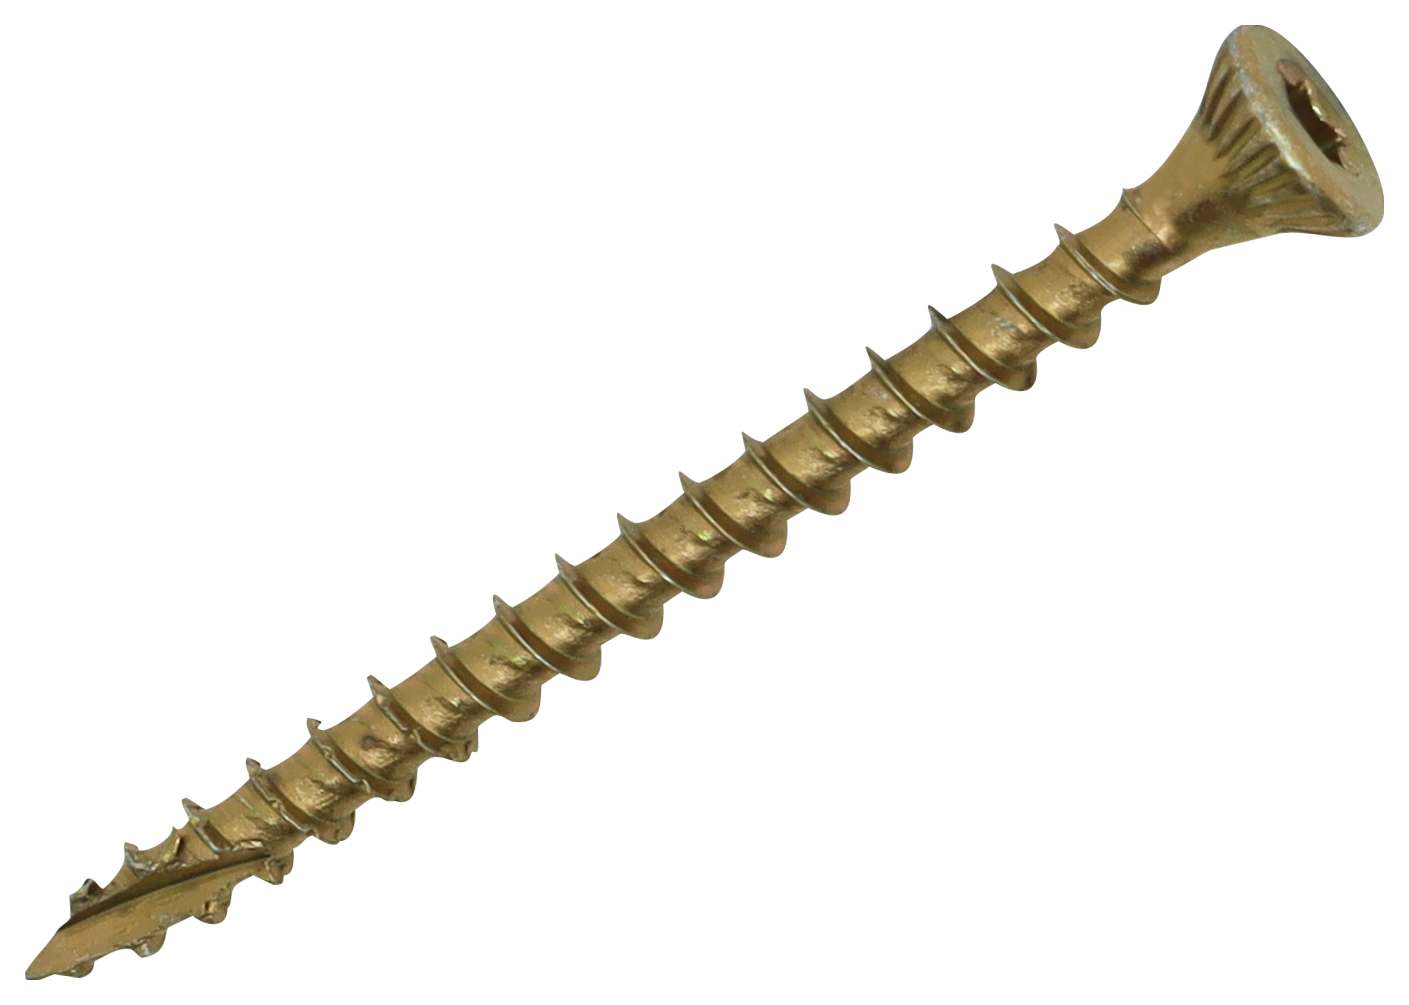 Image of Optimaxx TX Countersunk Passivated Wood Screw - 4 x 50mm - Pack of 200